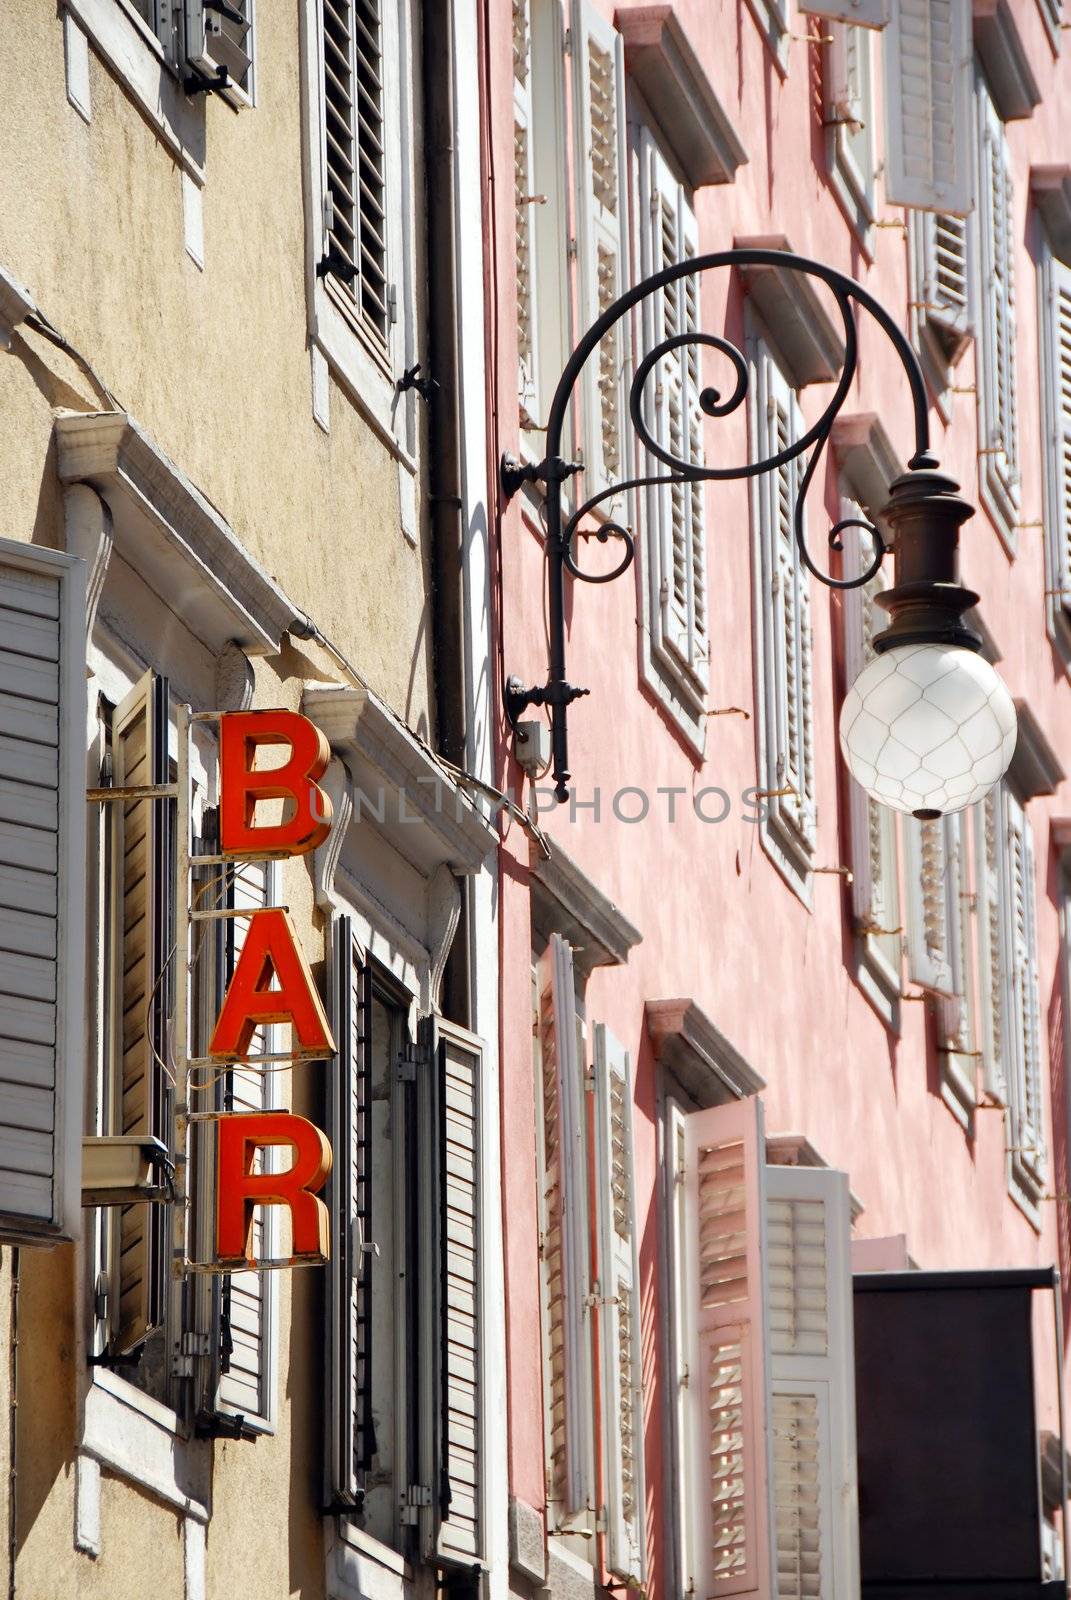 architecture detail, street lamp and bar sign  in Trieste, Italy